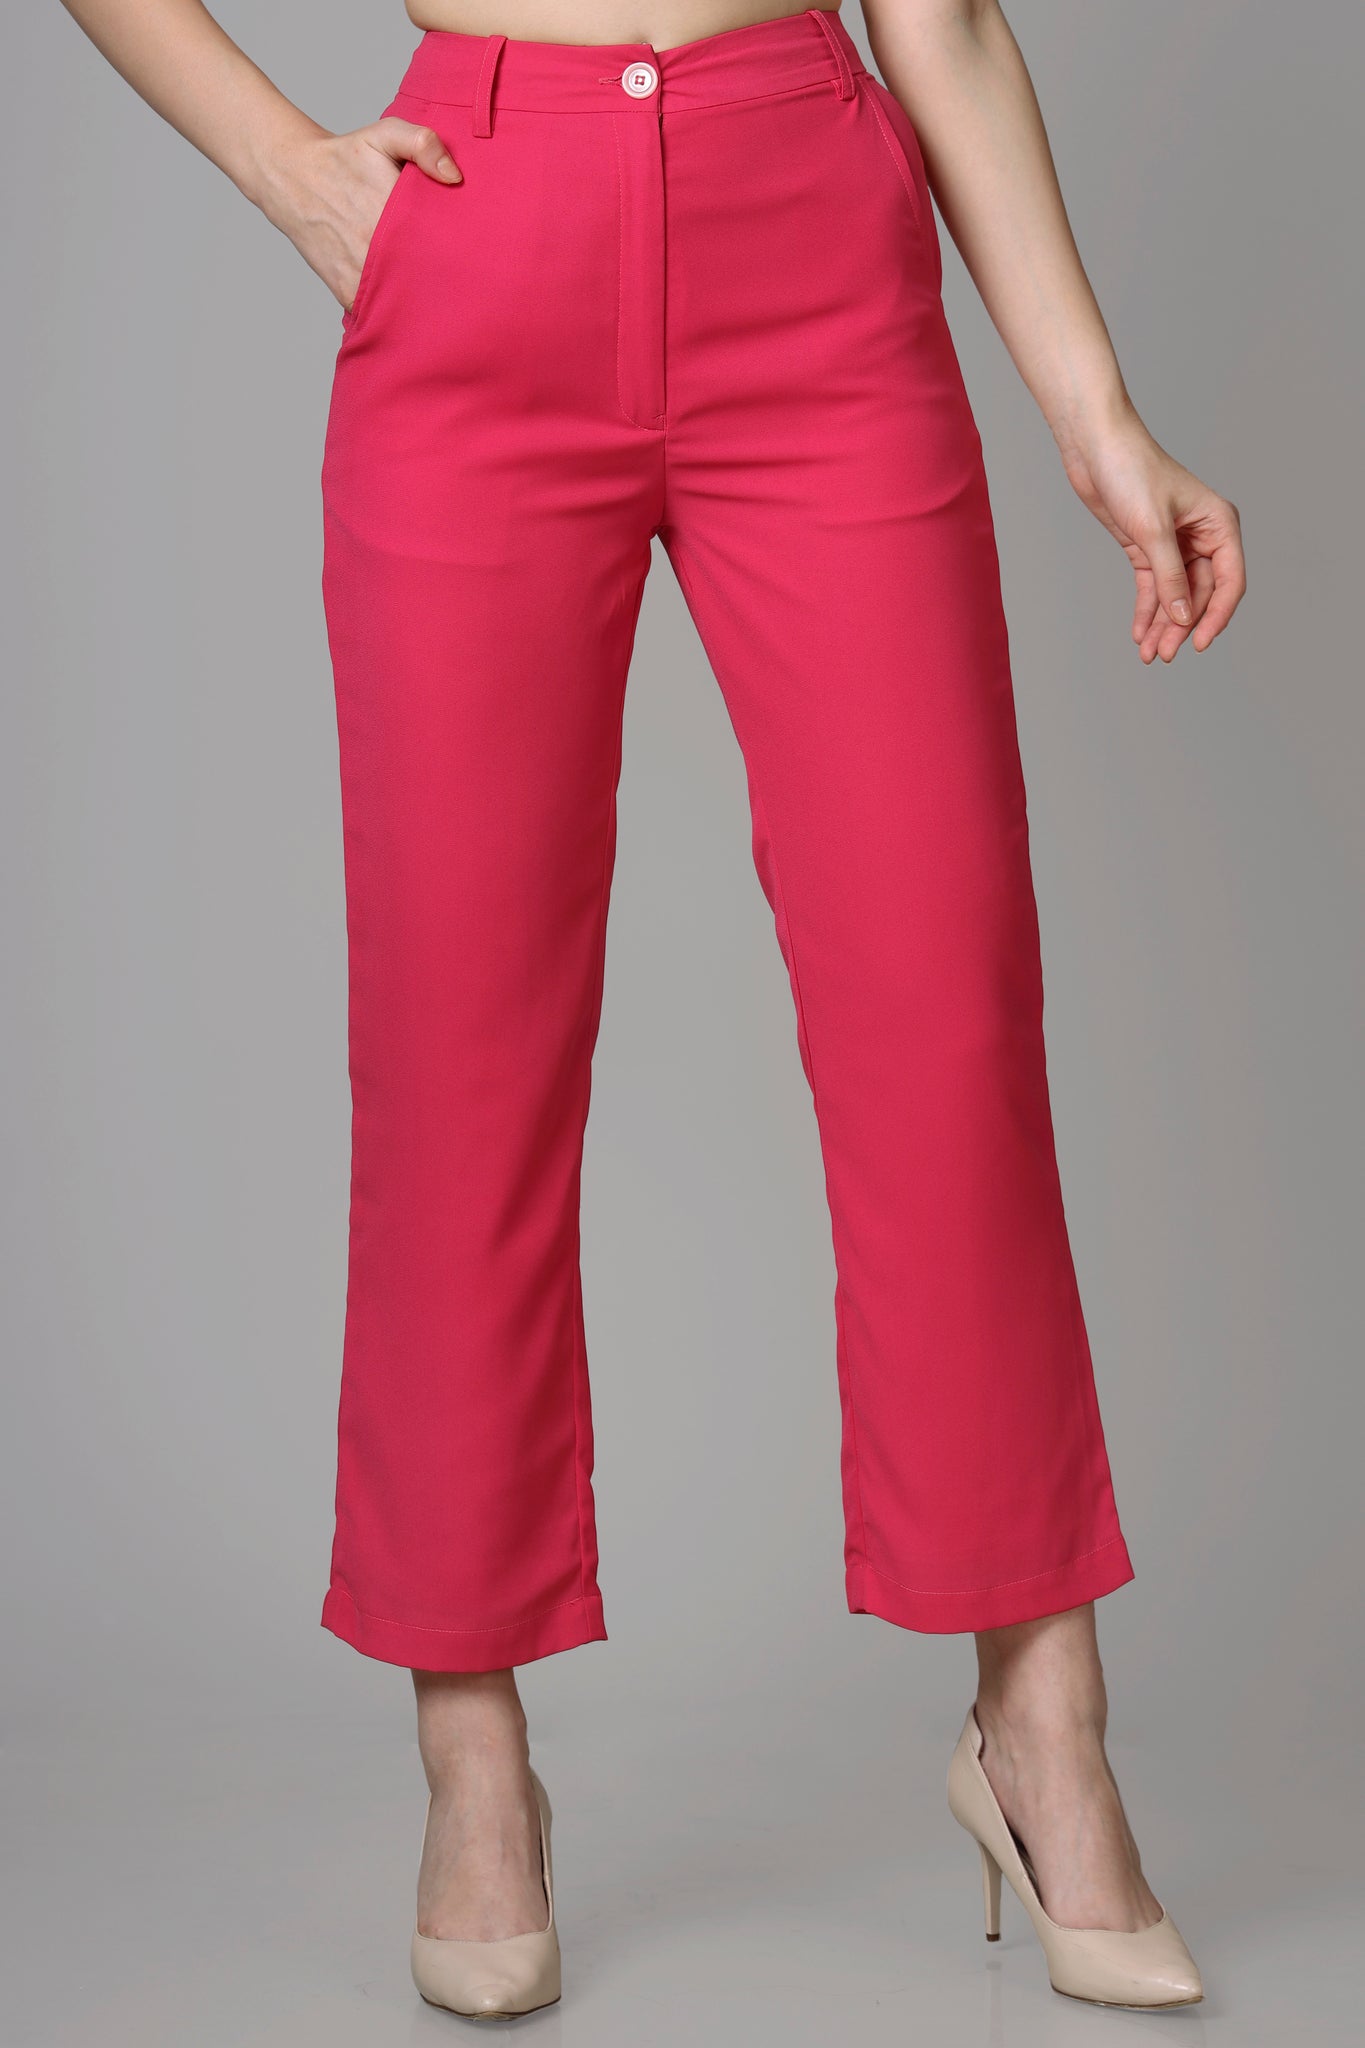 Classic Pink Women's Trousers